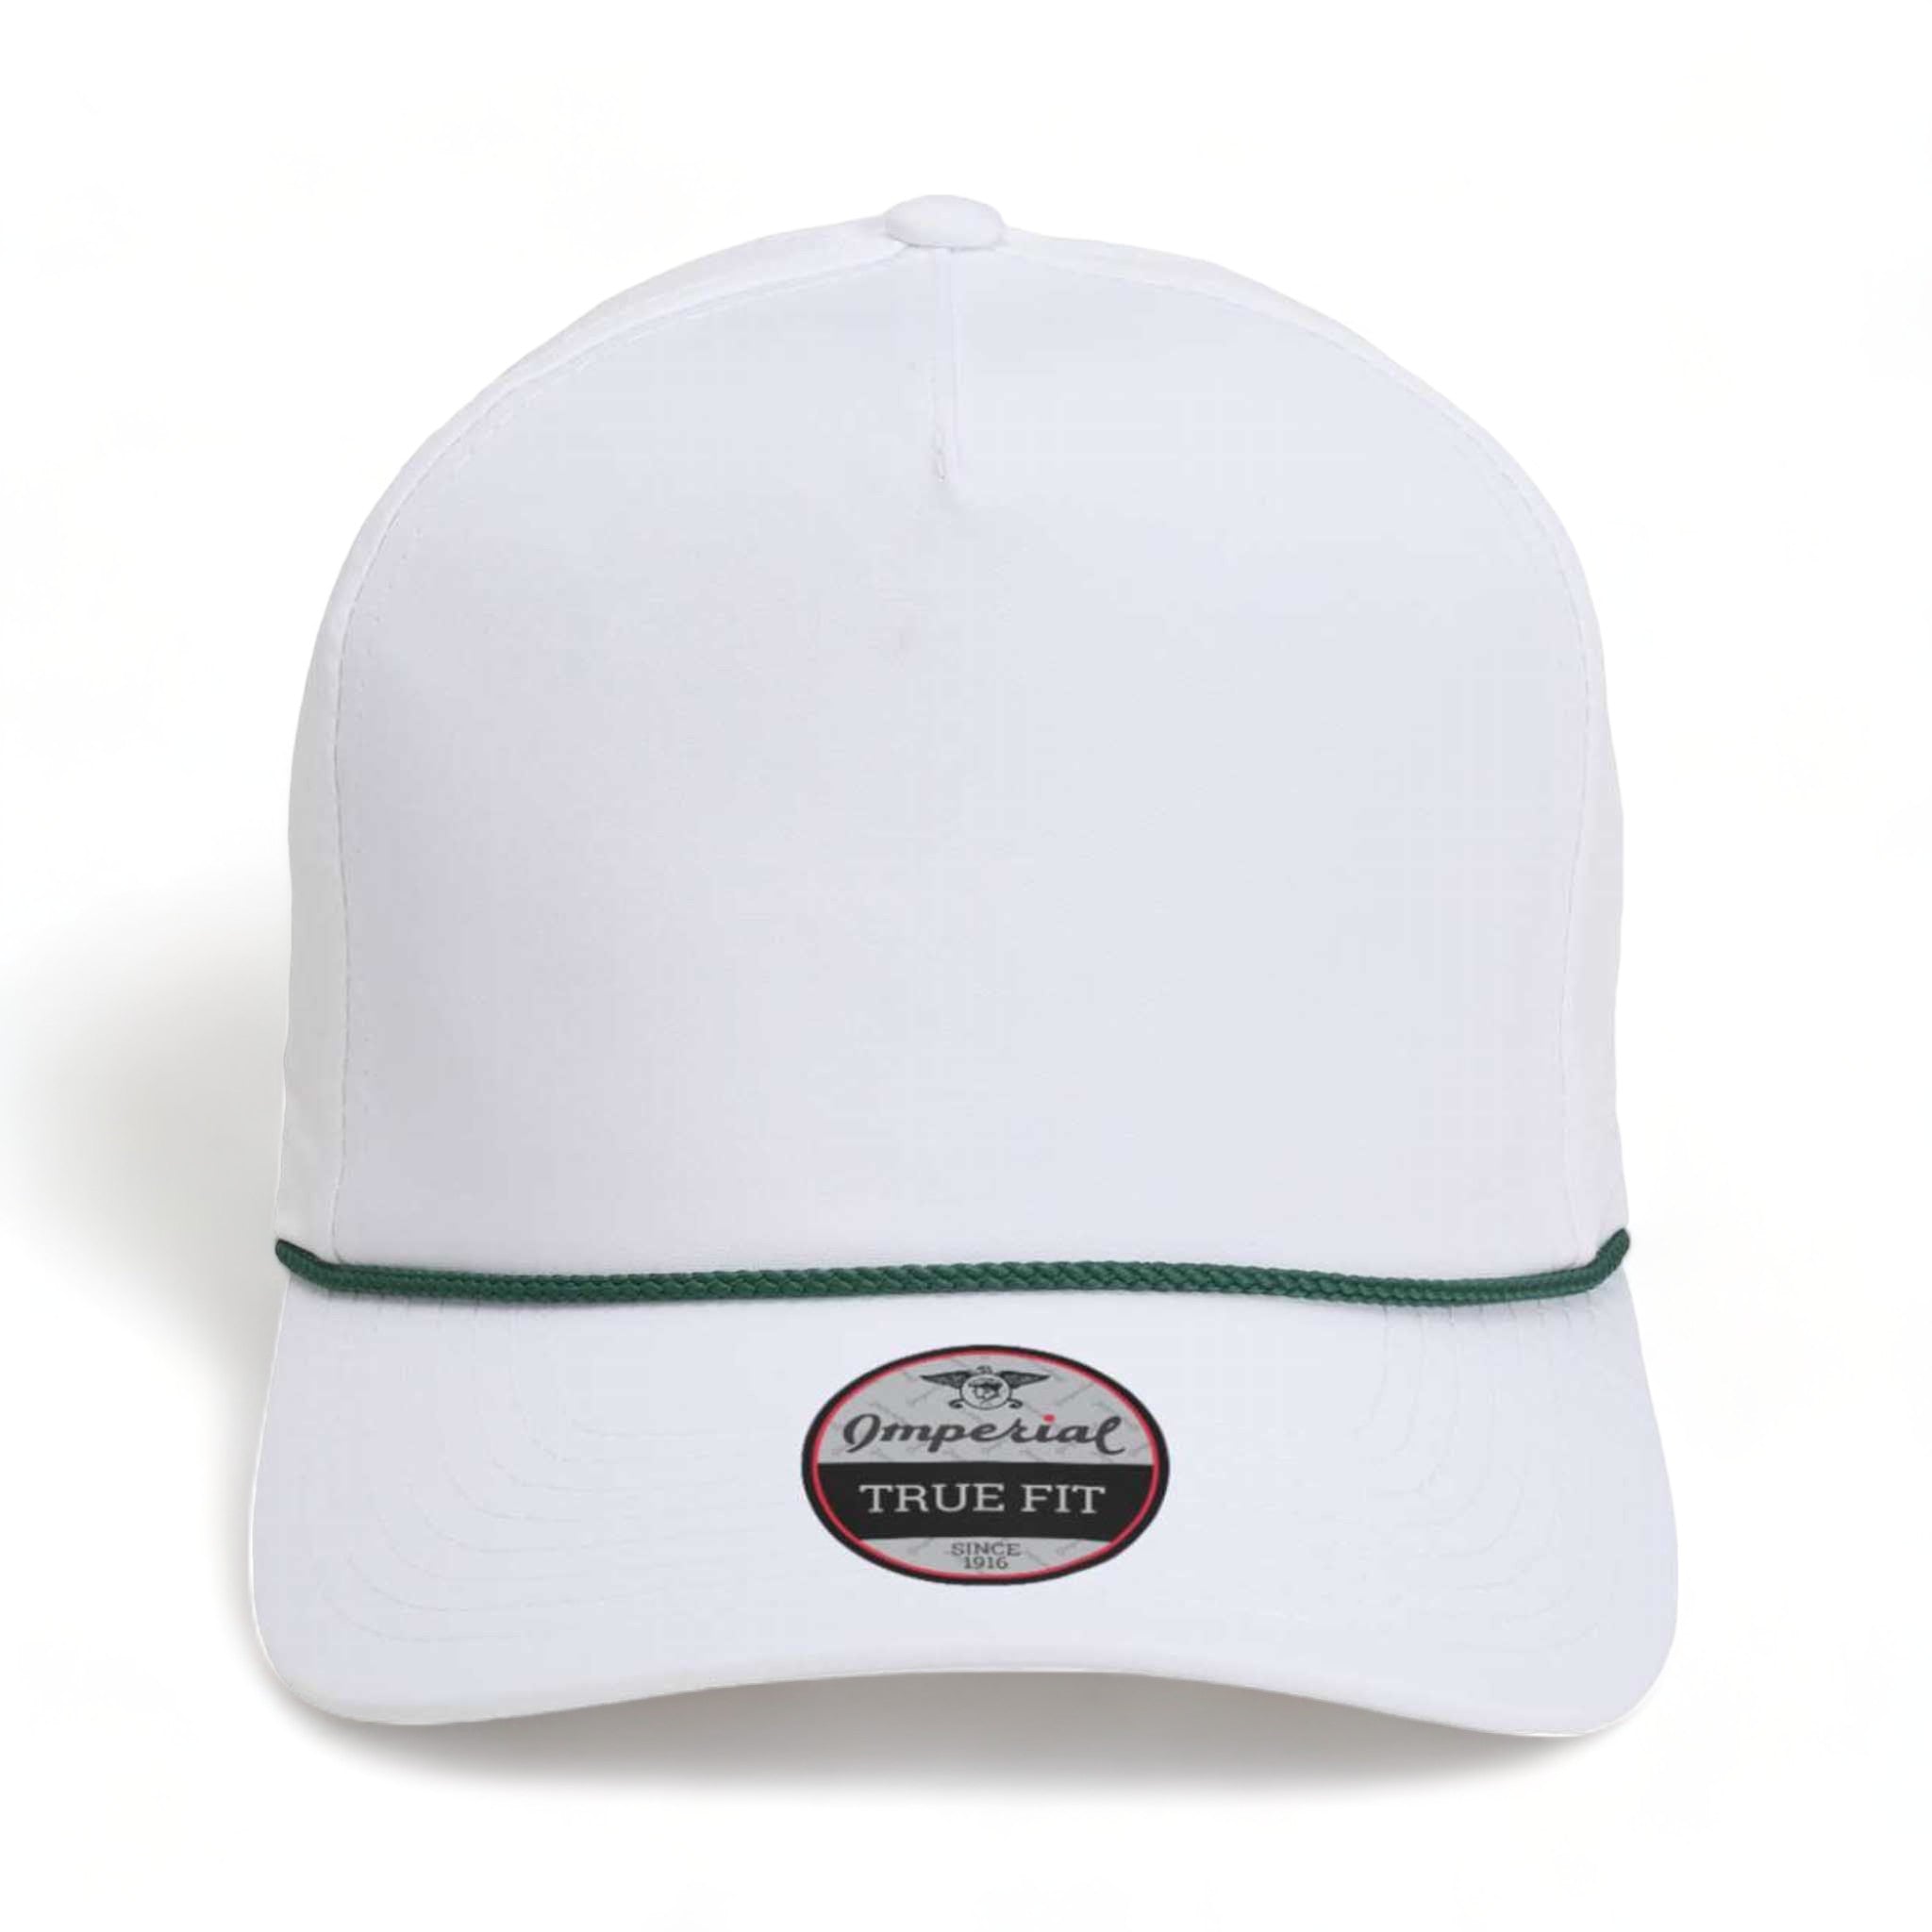 Front view of Imperial 5054 custom hat in white and dark green